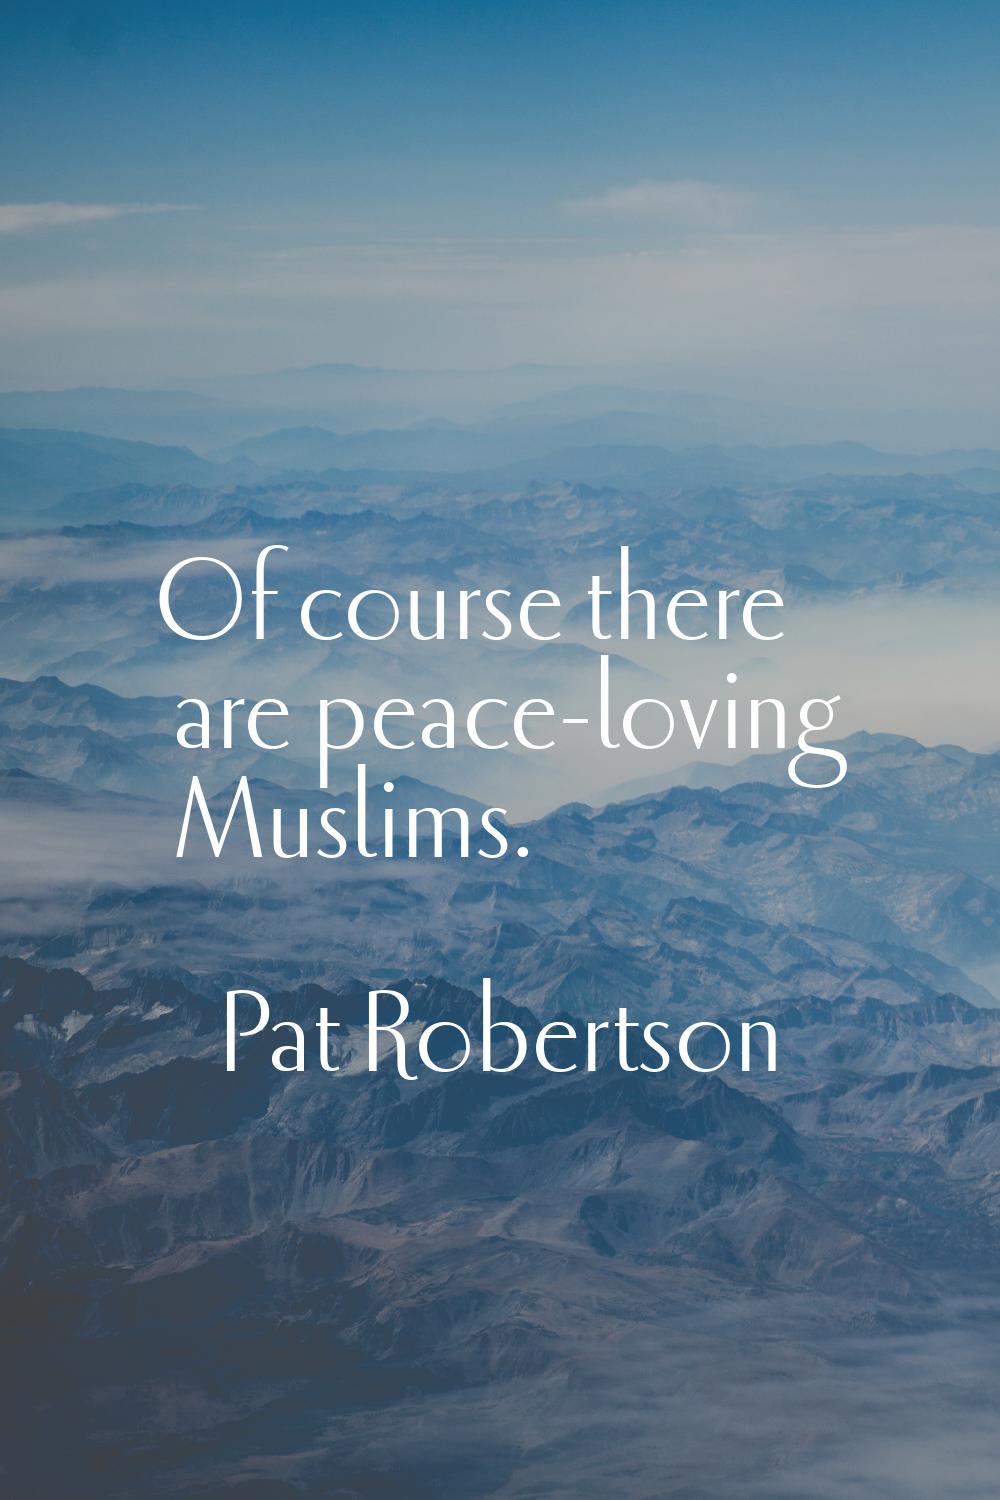 Of course there are peace-loving Muslims.